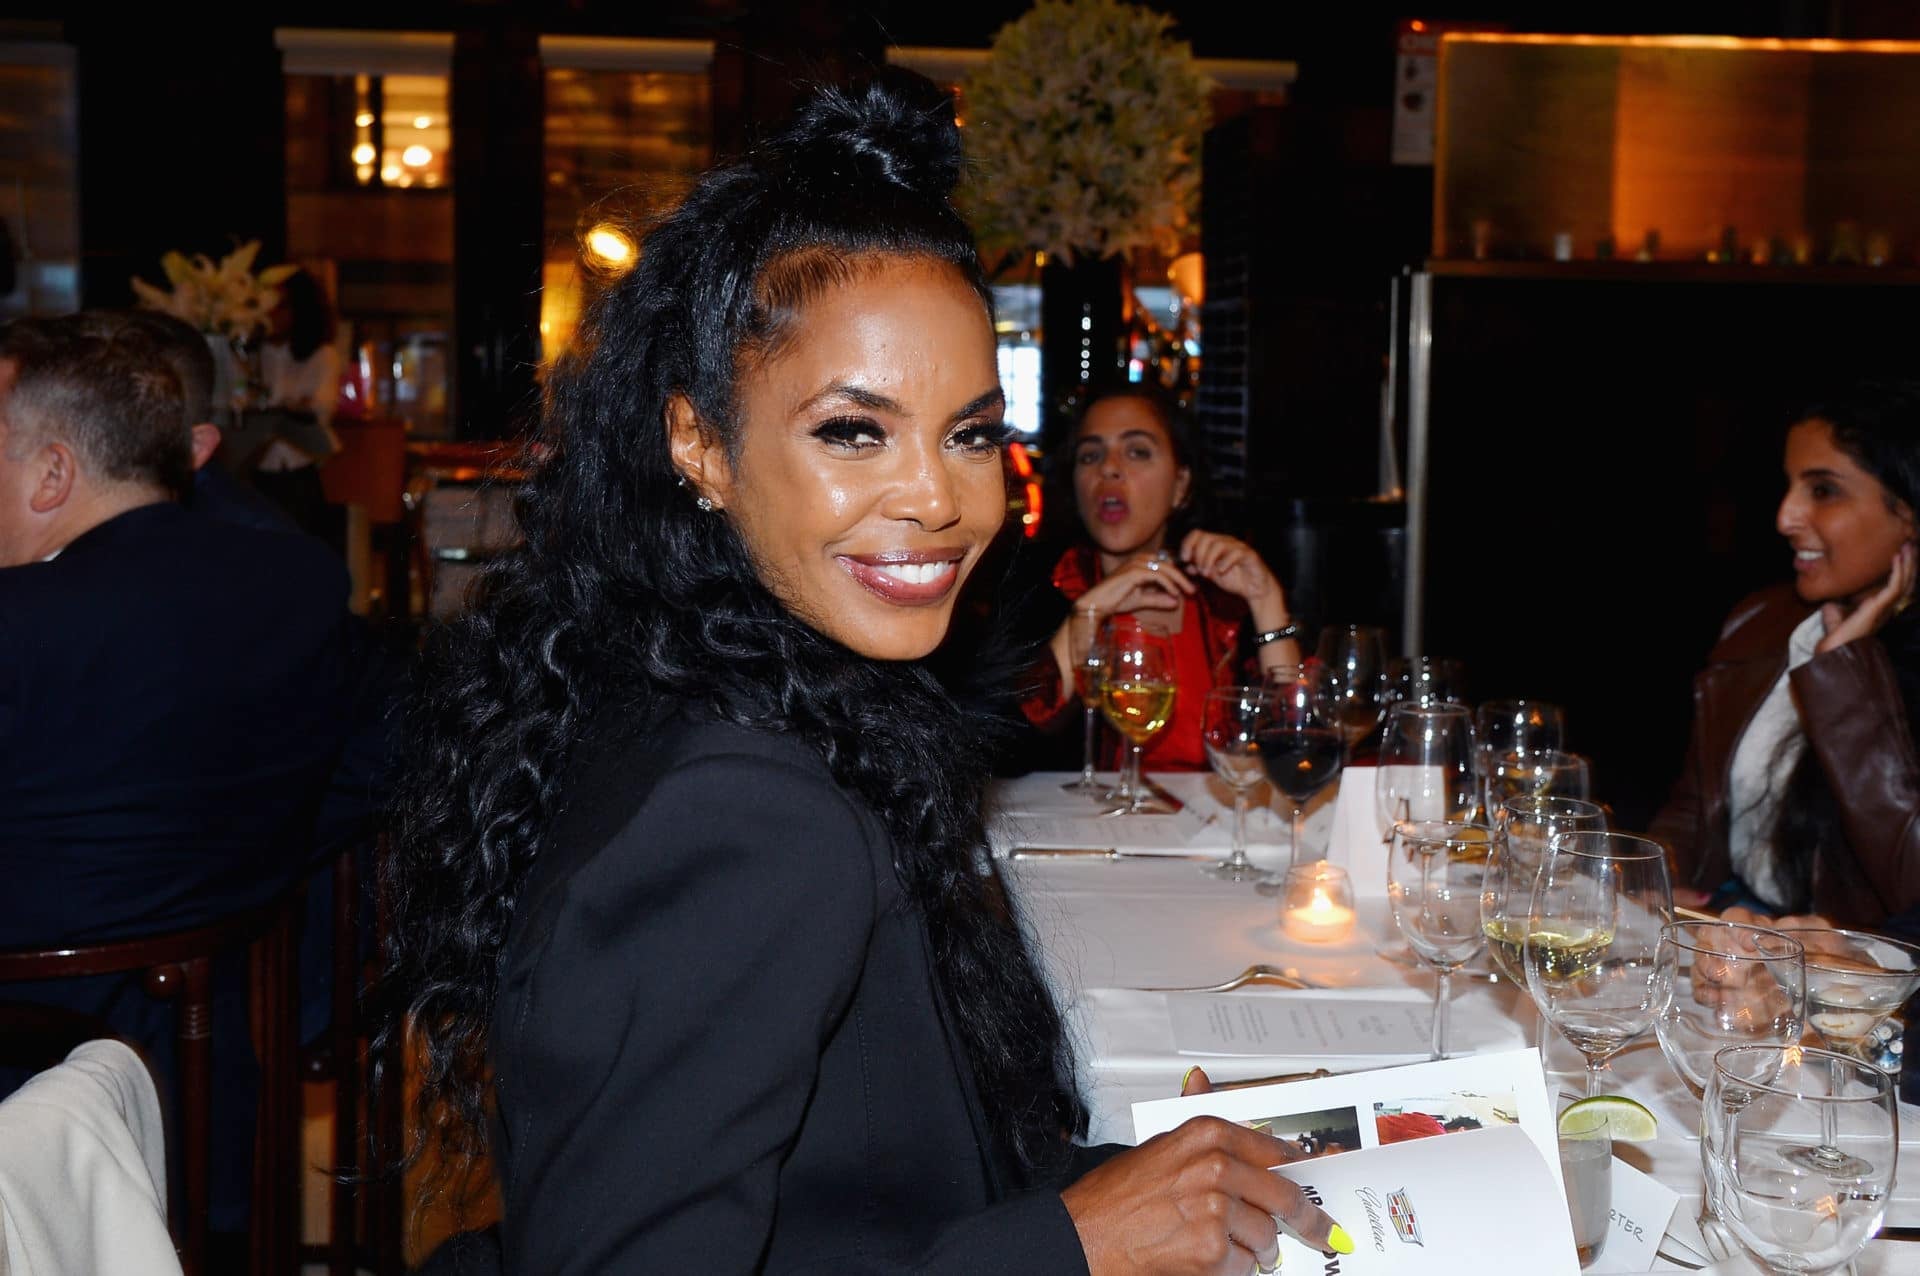 Kim Porter's Cause Of Death Revealed